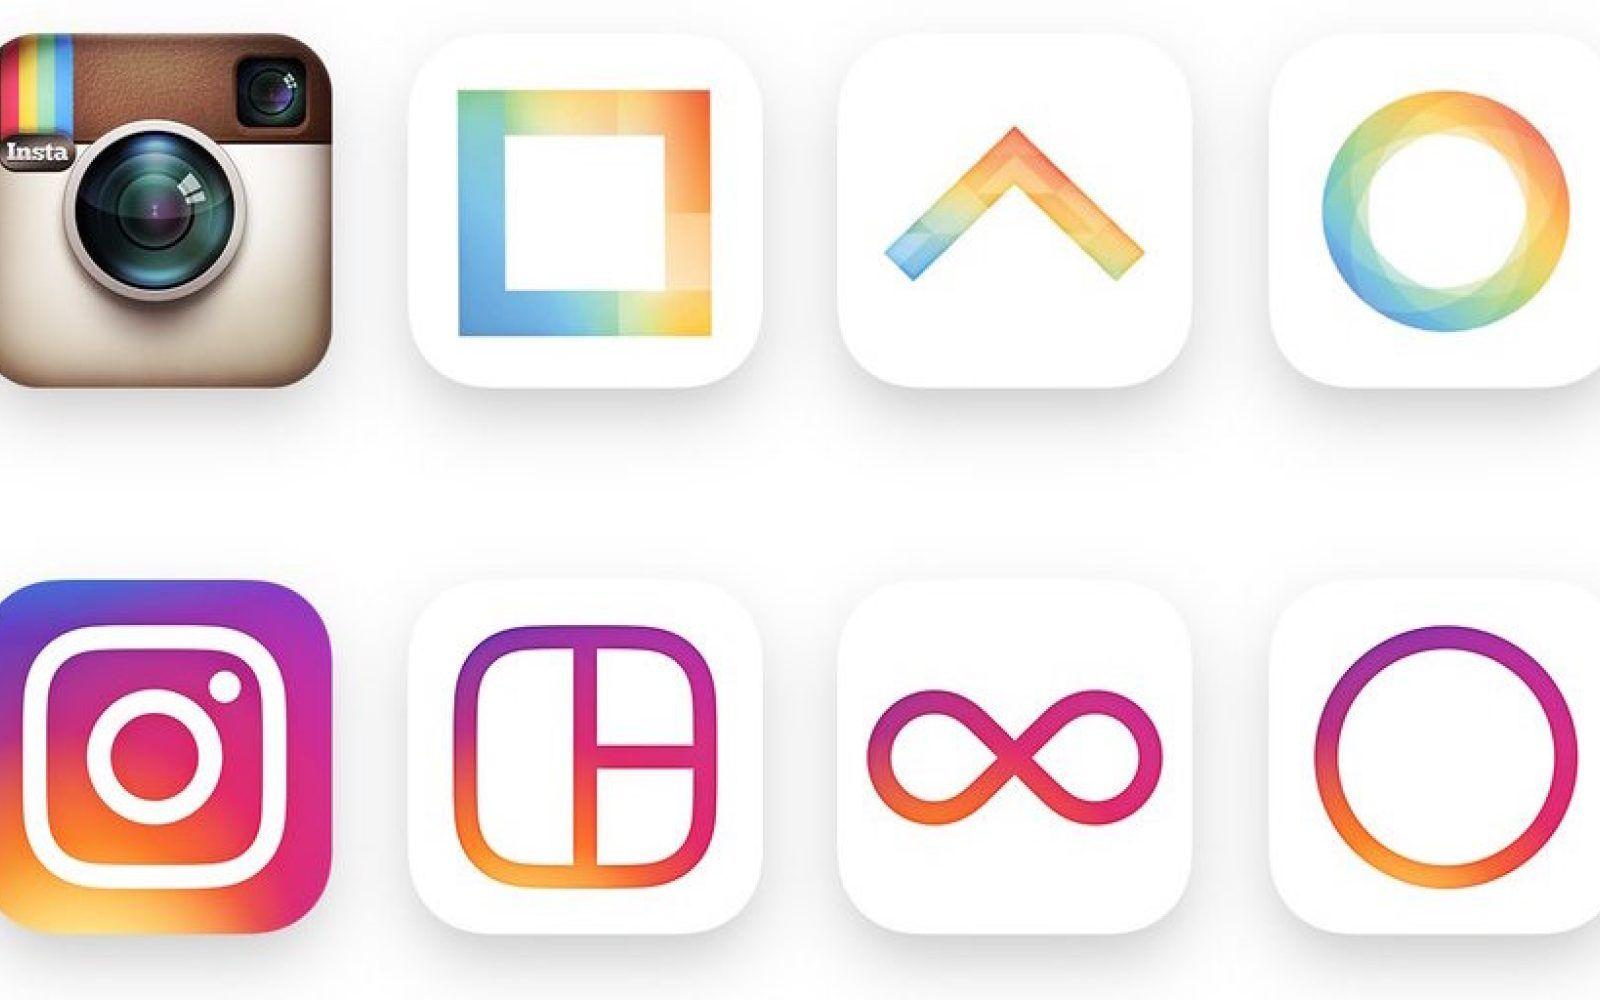 Instagram All Logo - Instagram updated with all-new new icon + black & white design - 9to5Mac